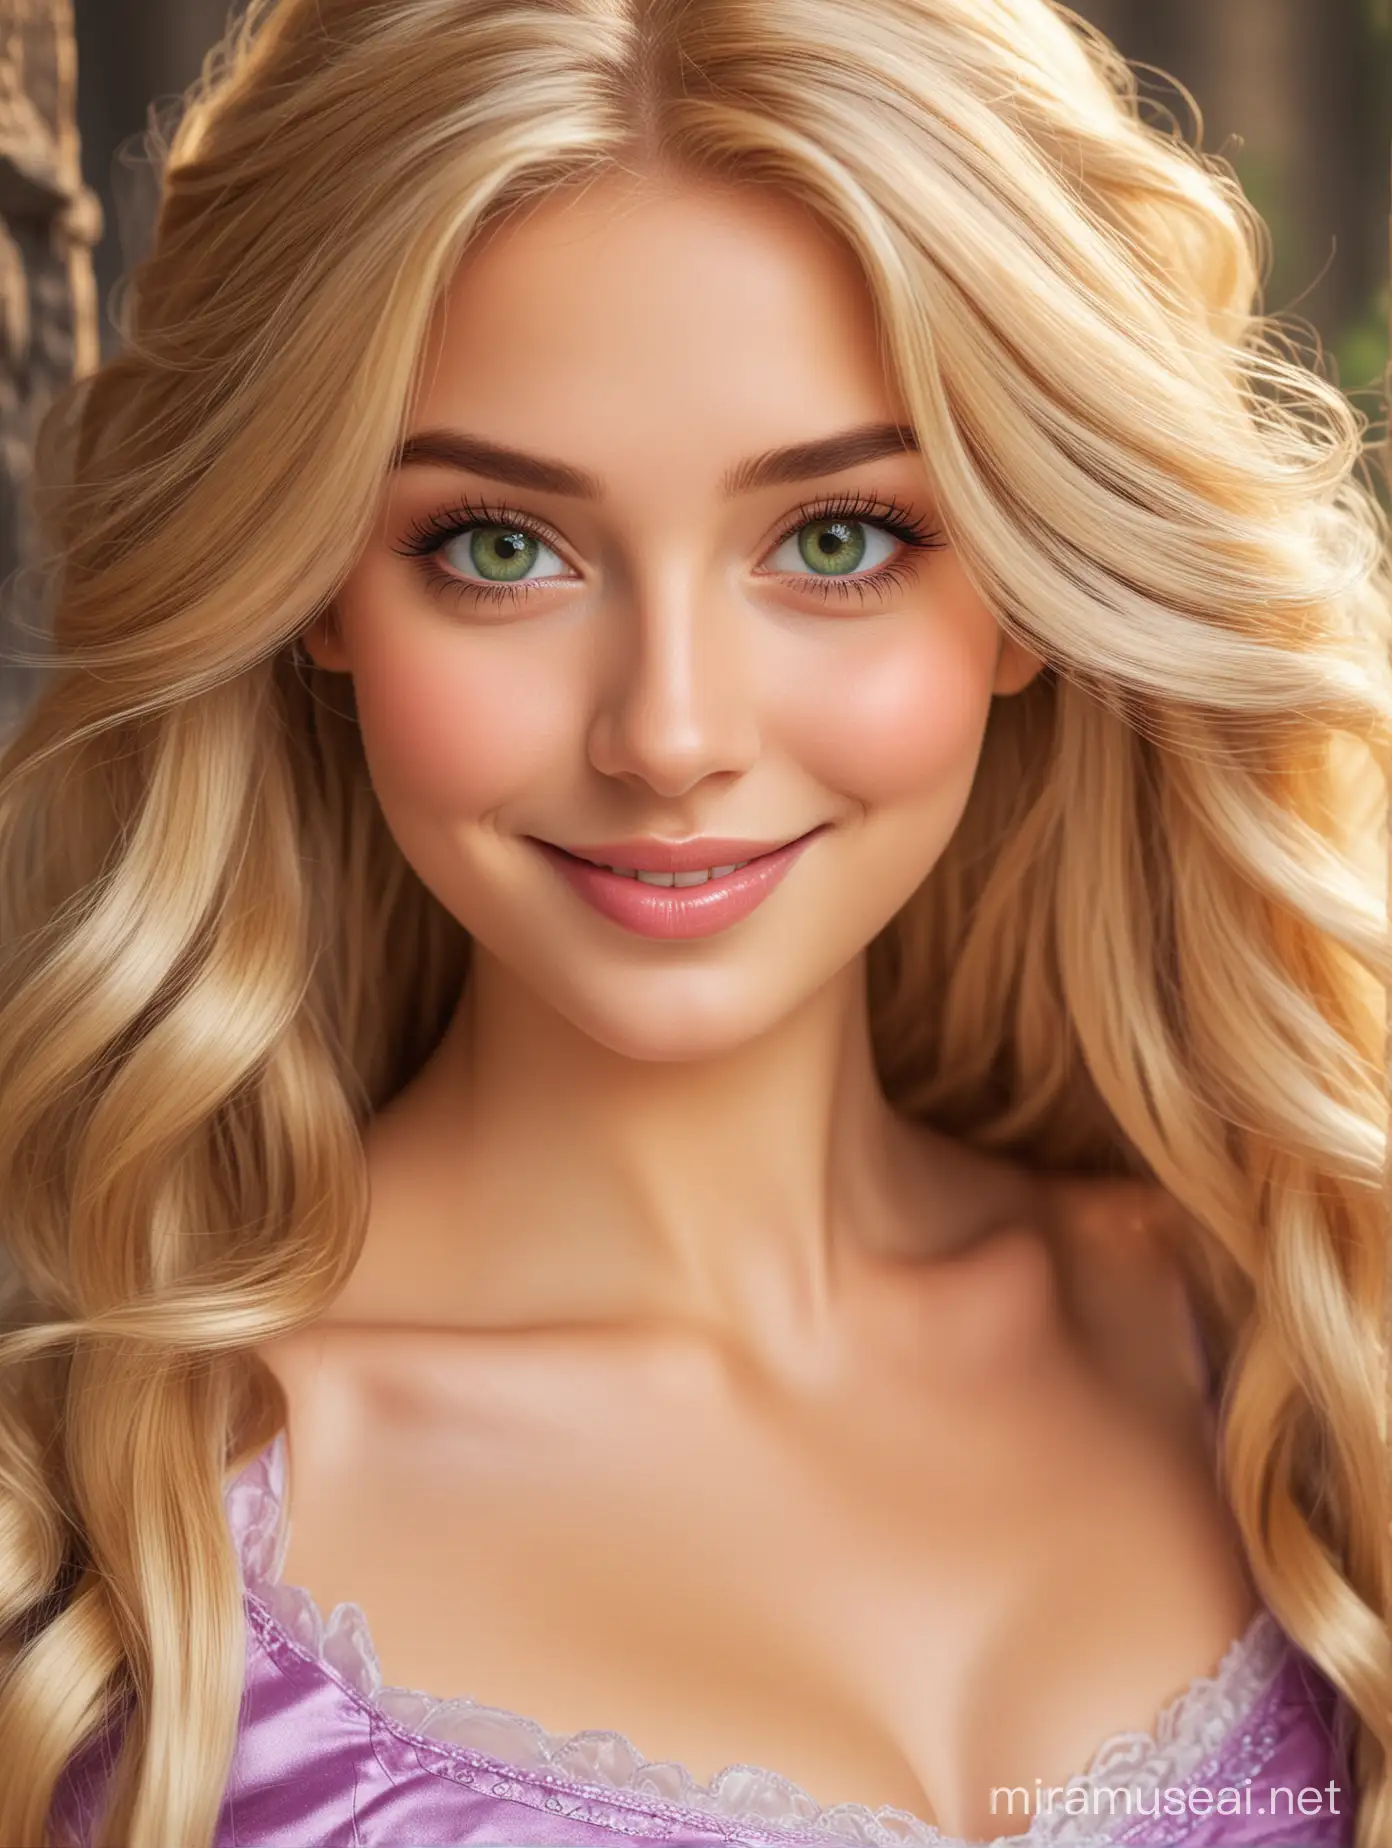 Smiling Rapunzel Princess with Blonde Hair and Green Eyes